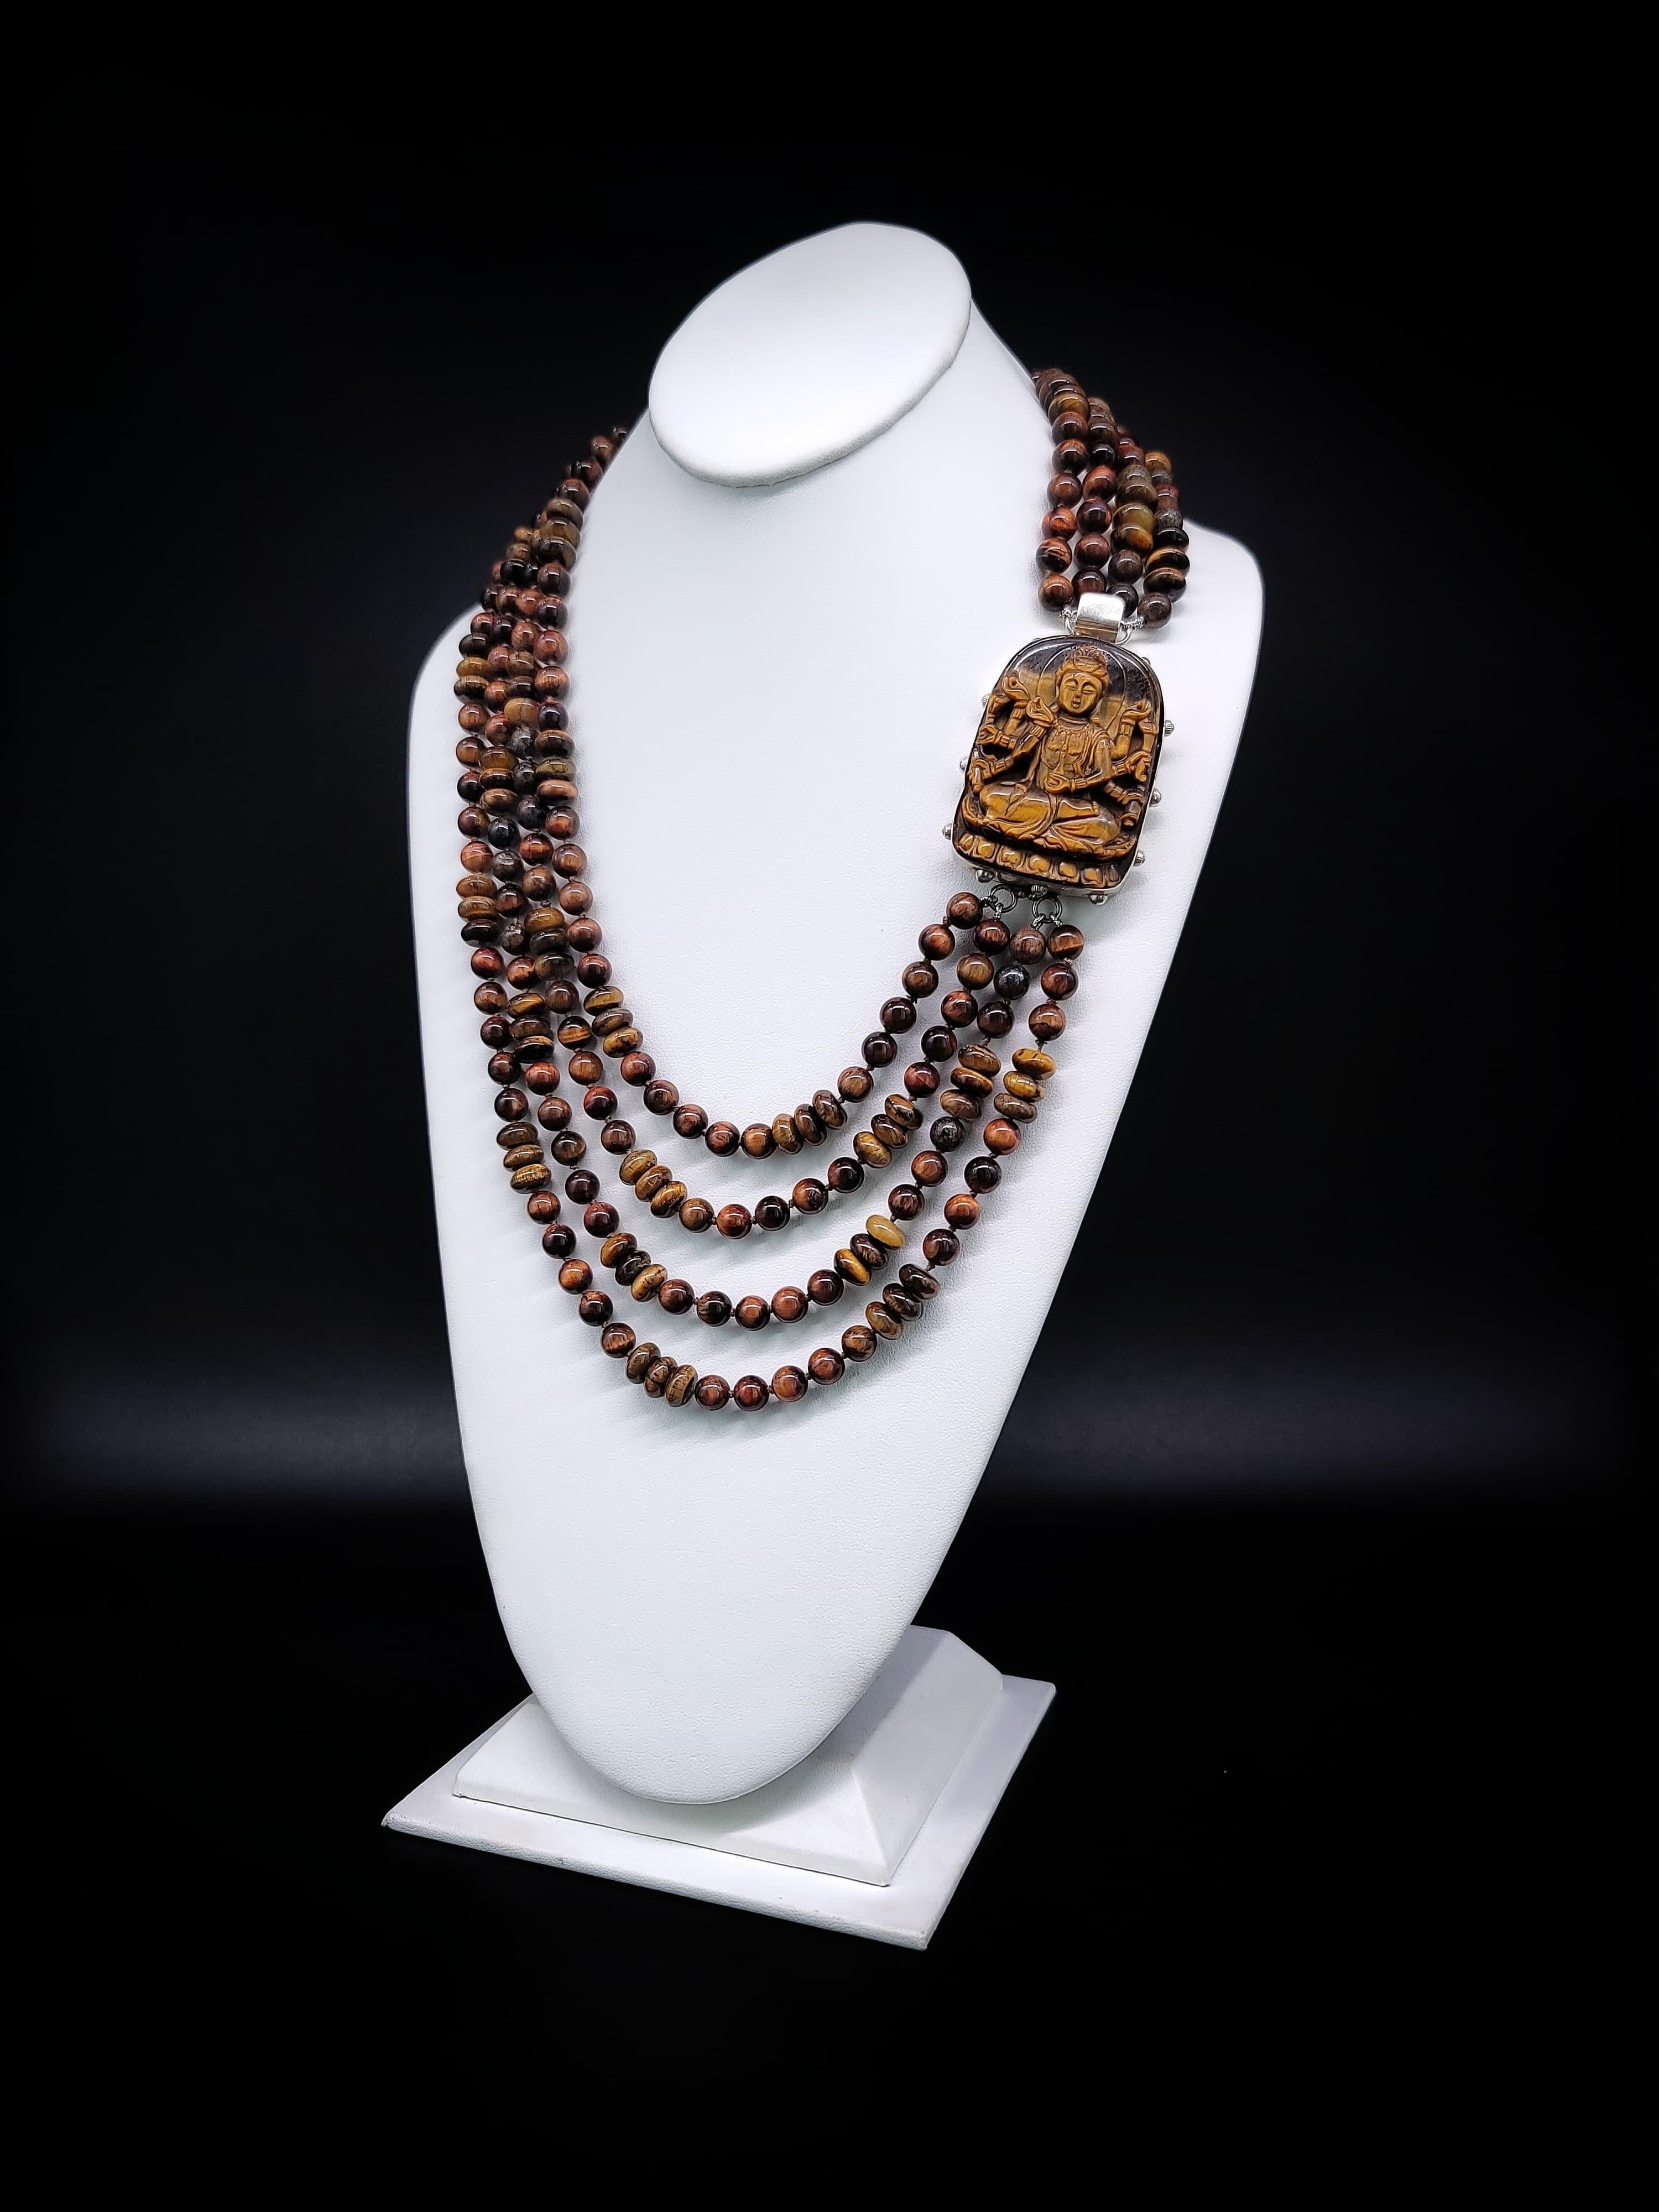 Contemporary A.jeschel Sophisticated Tiger’s Eye Necklace with a Powerful Clasp. For Sale